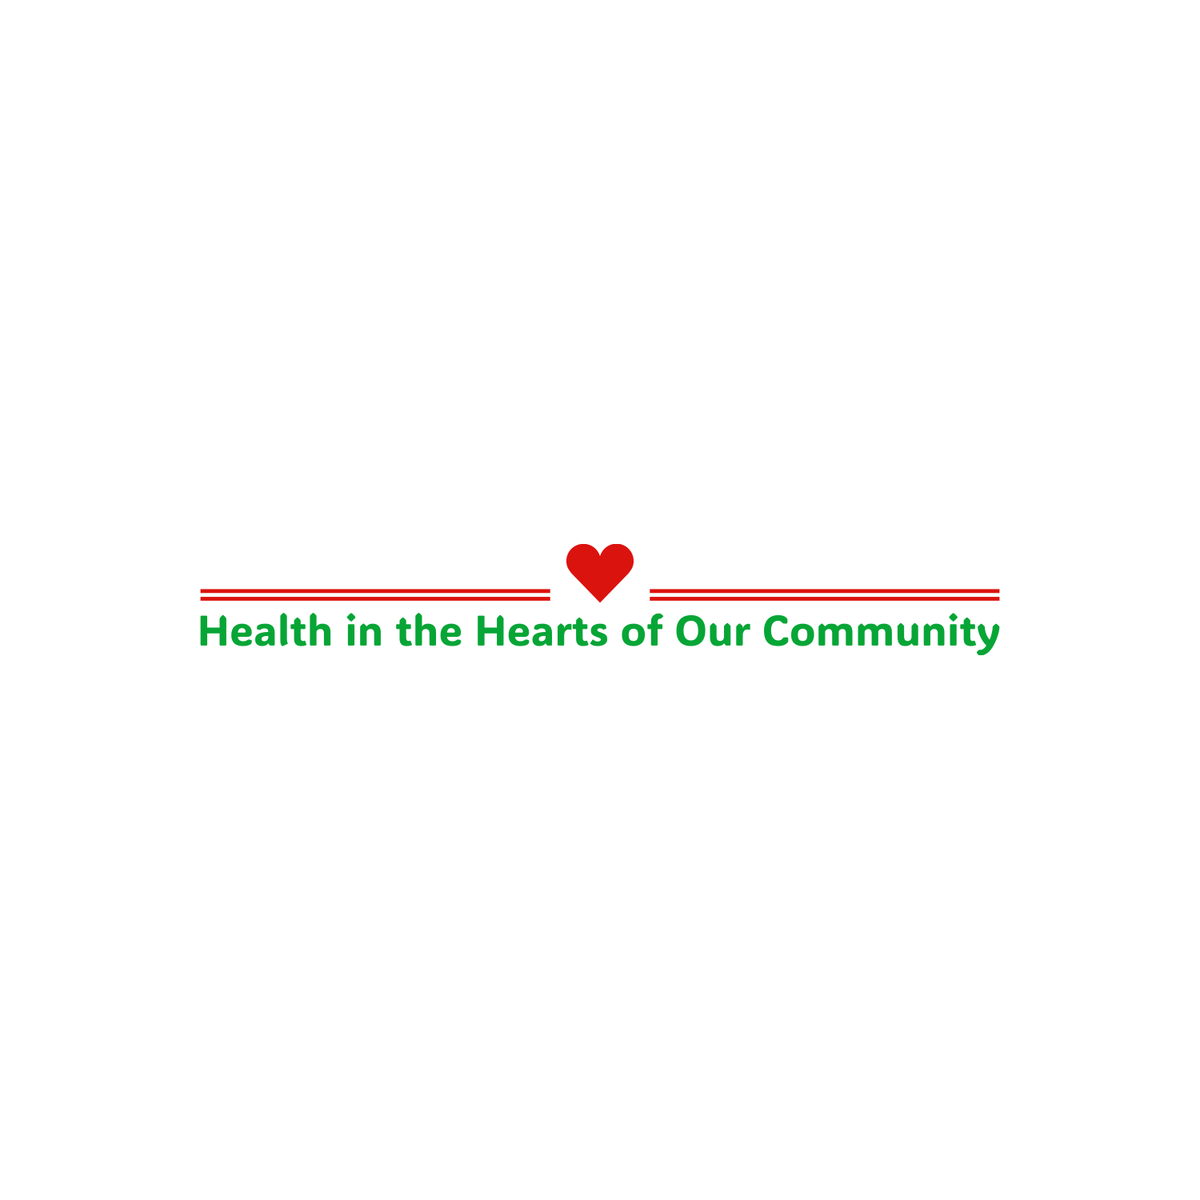 Health in the Hearts of Our Community project...quite simply, we're empowering people to better understand their health, take advantage of the support / activities on their doorstep and help them to help others in our community to reduce risk factors.